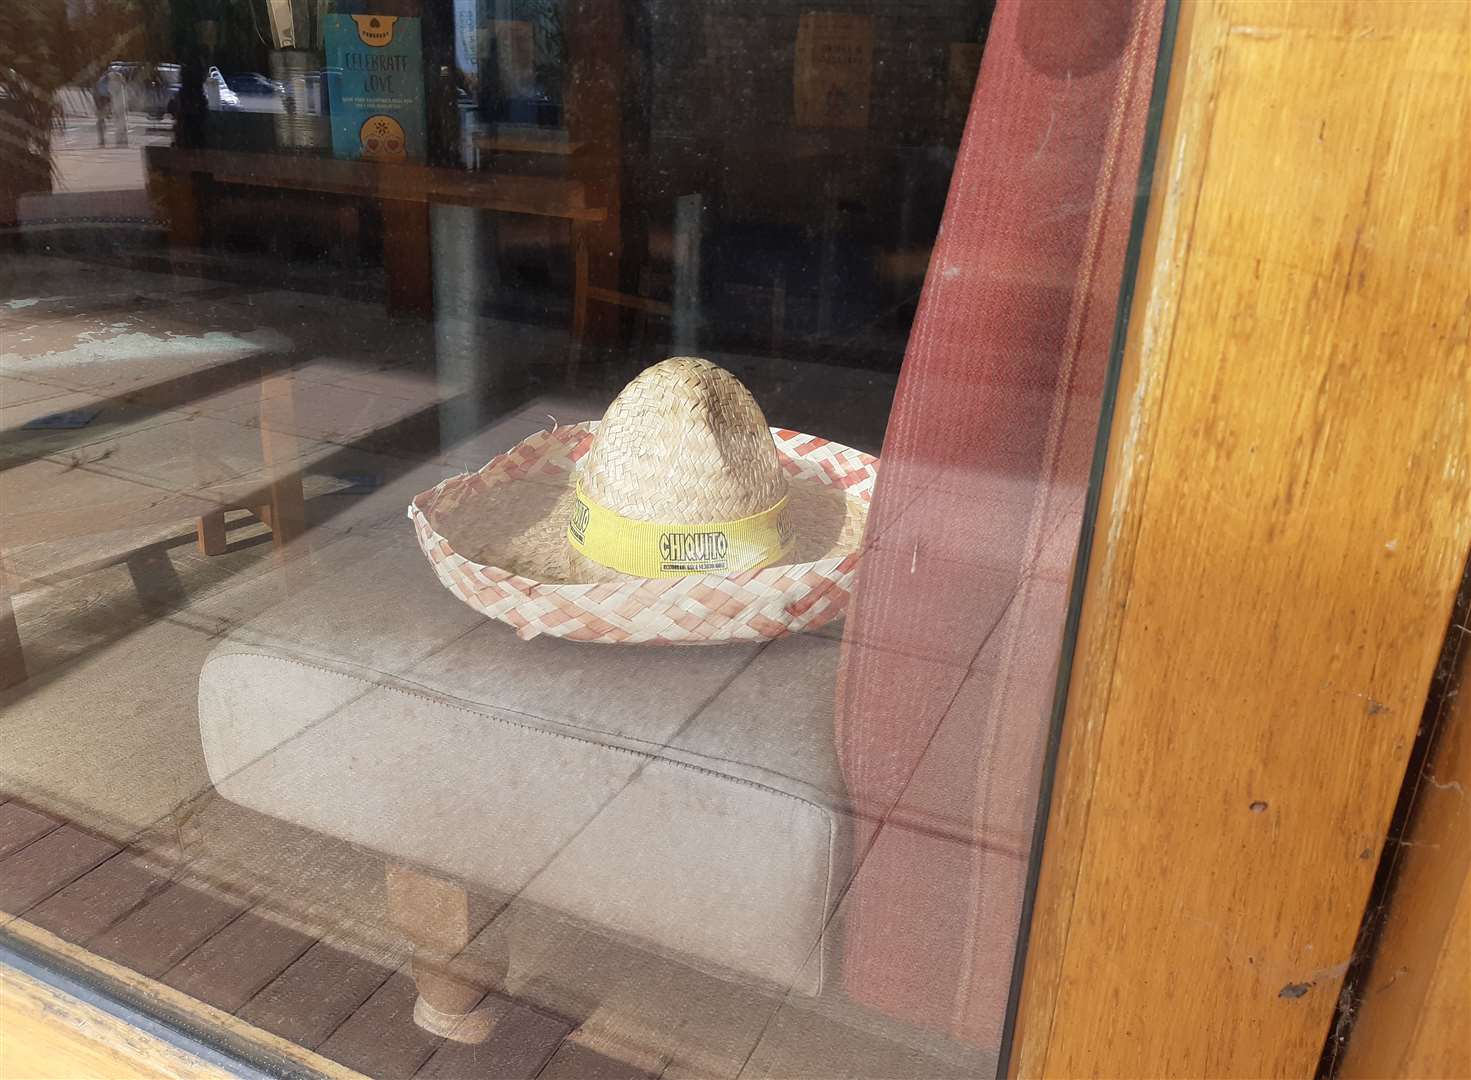 A solitary sombrero in the front window of Ashford's now-empty Chiquito